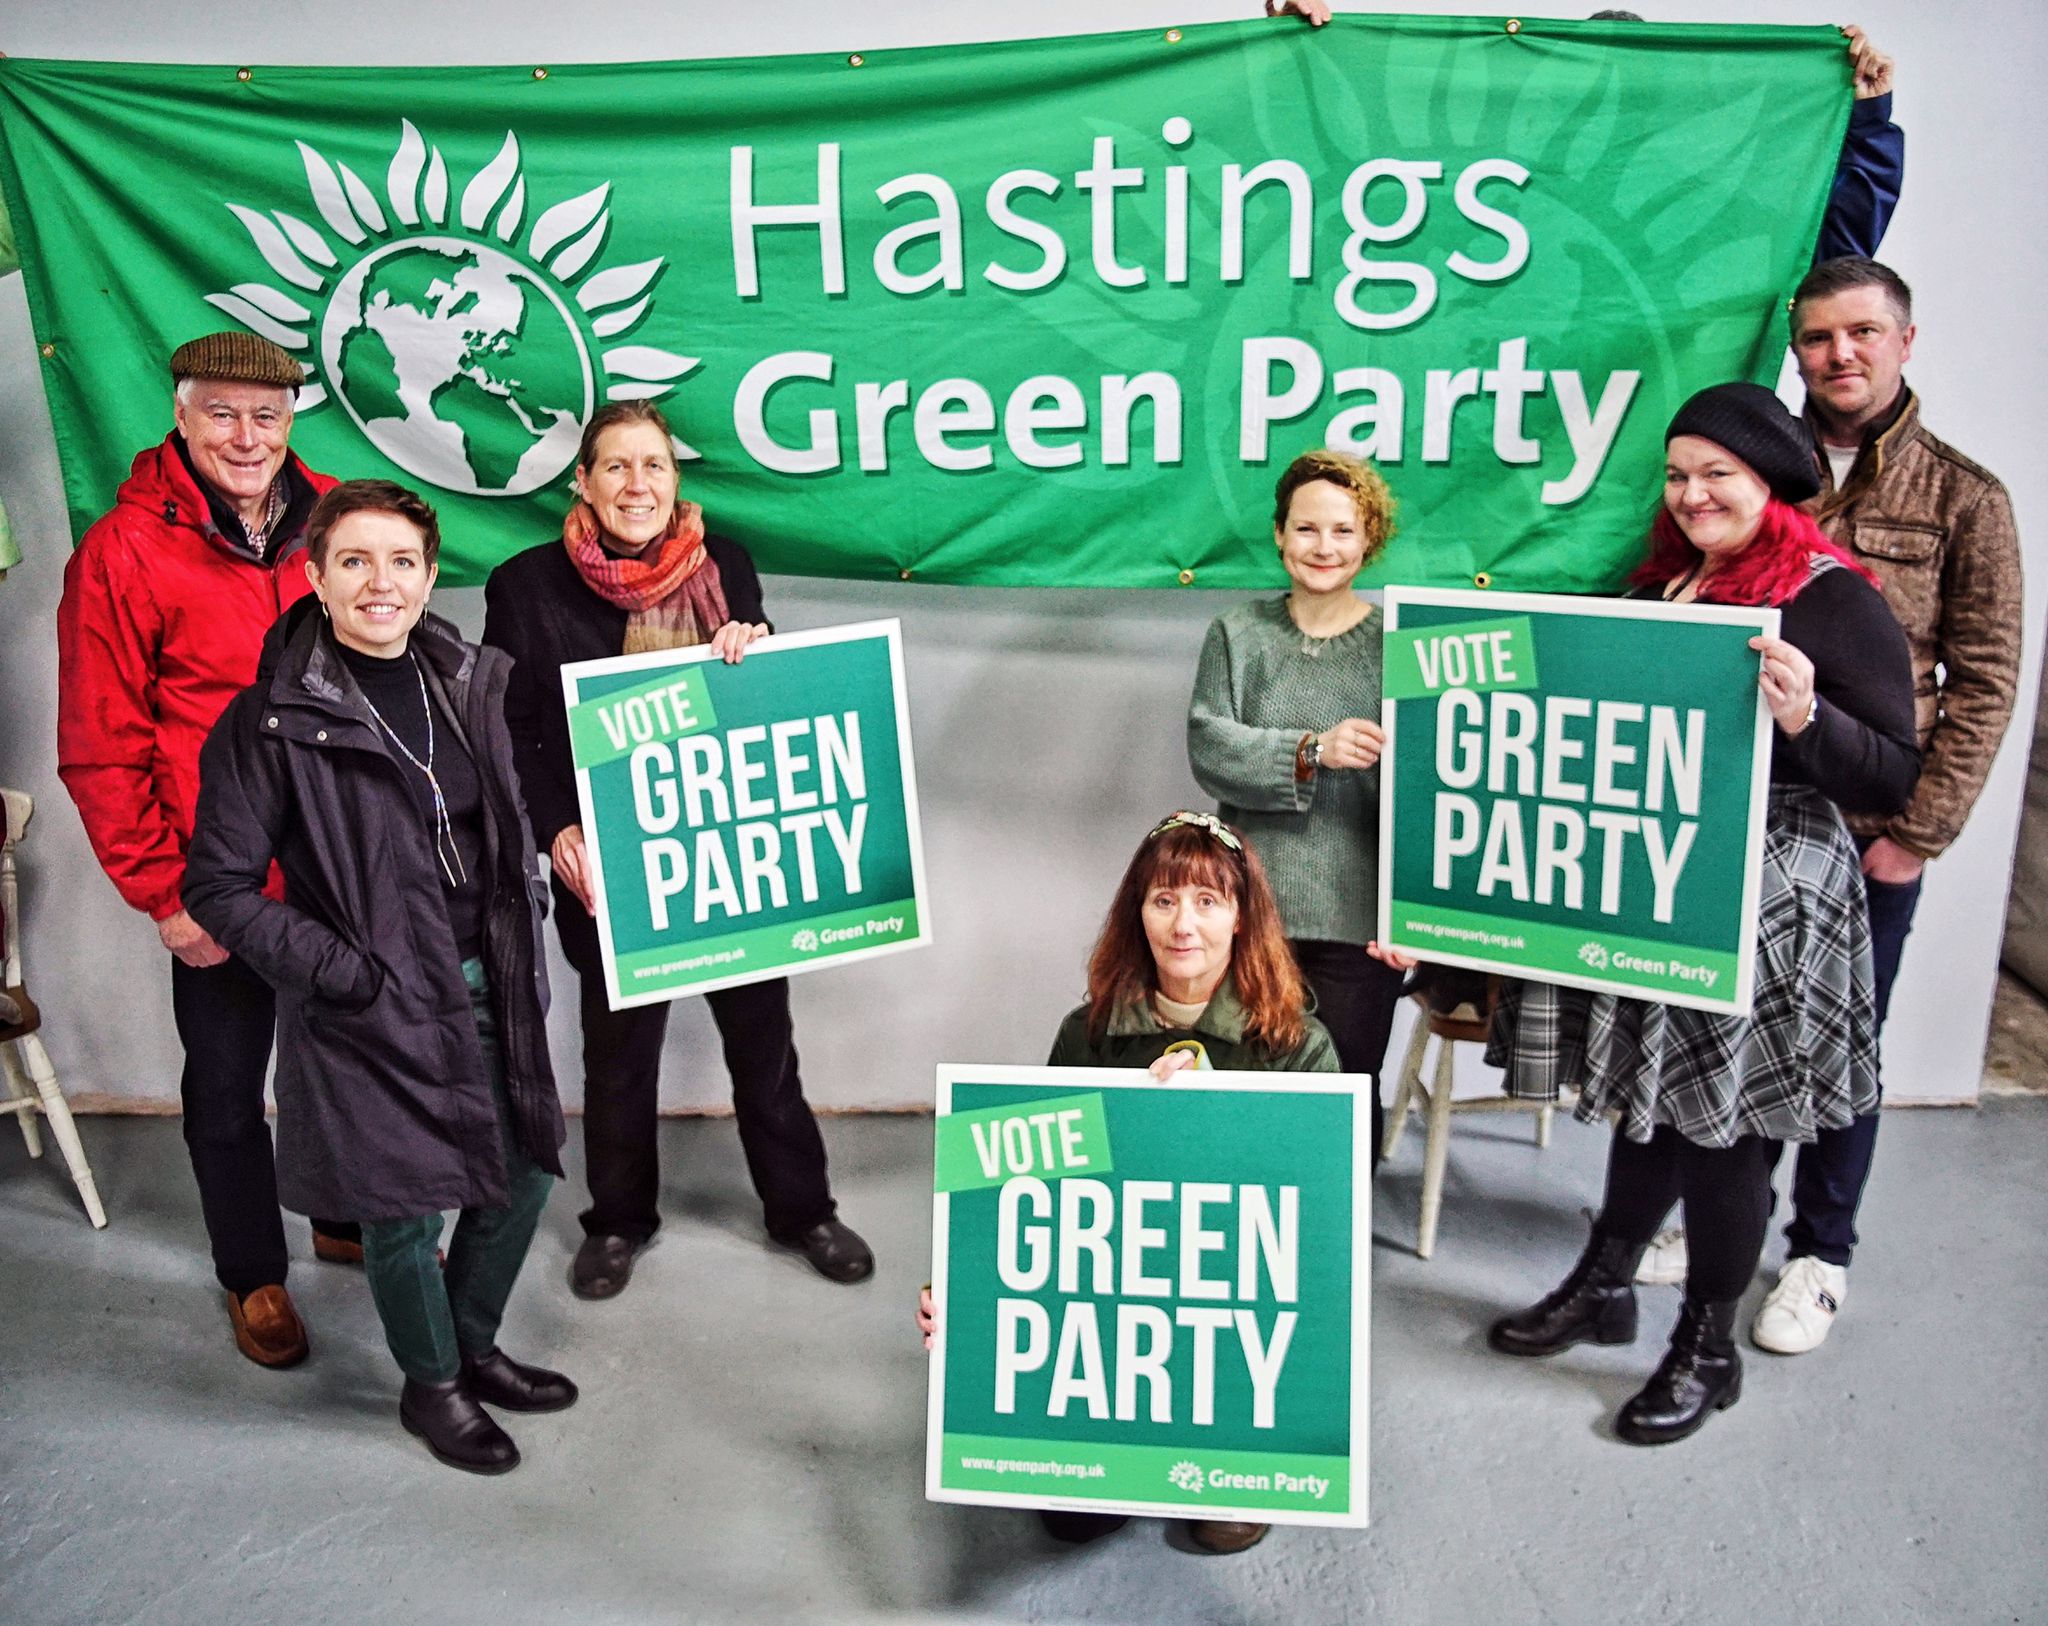 Hastings Green Party welcomes co-leader Carla Denyer to town